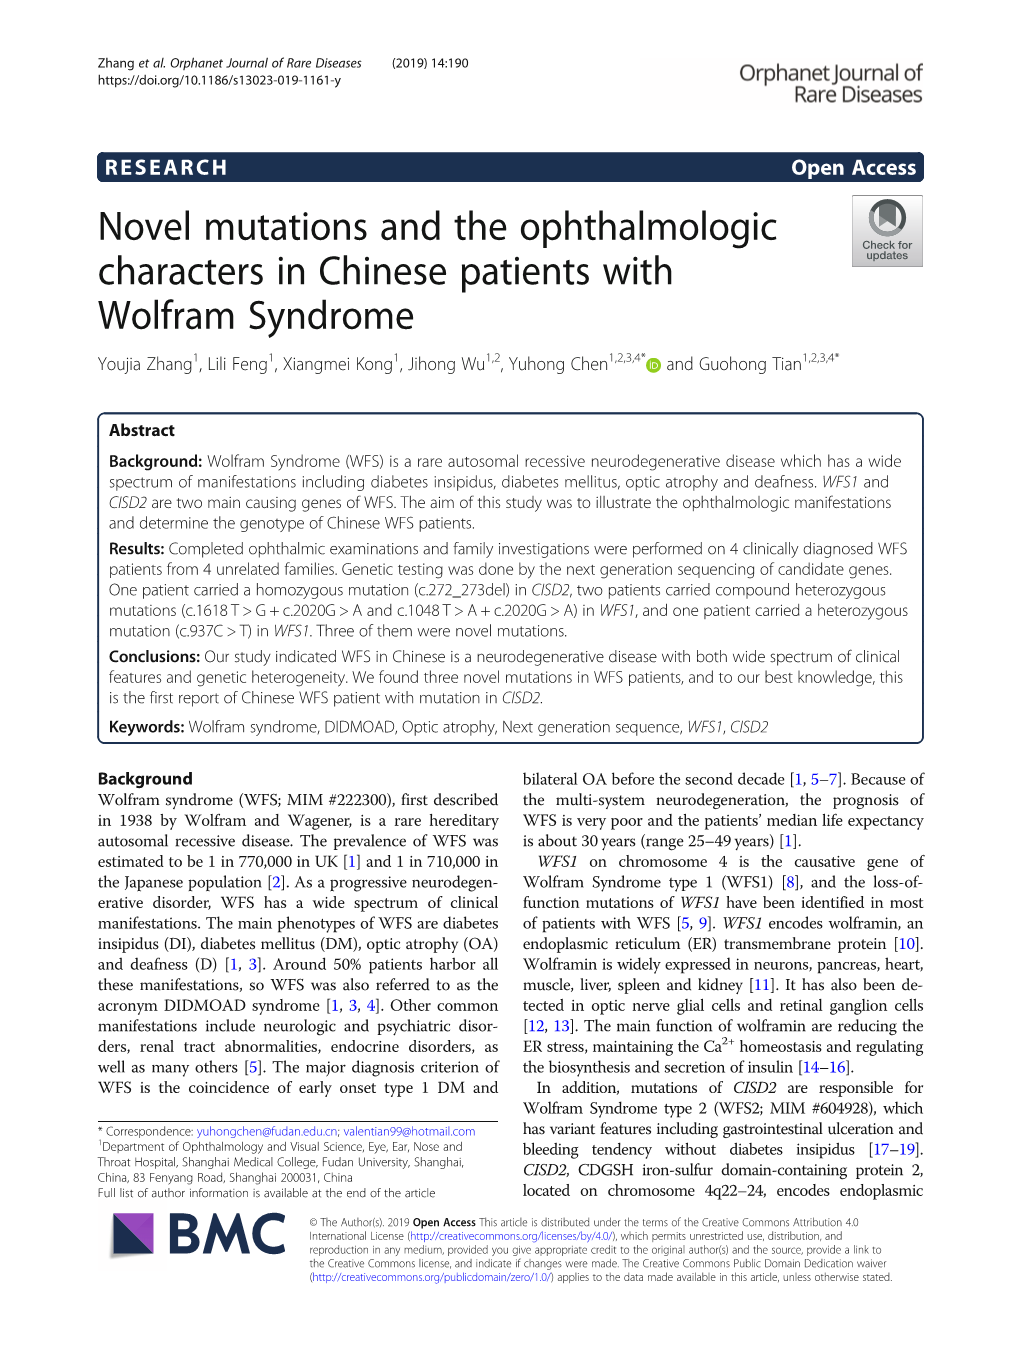 Novel Mutations and the Ophthalmologic Characters In